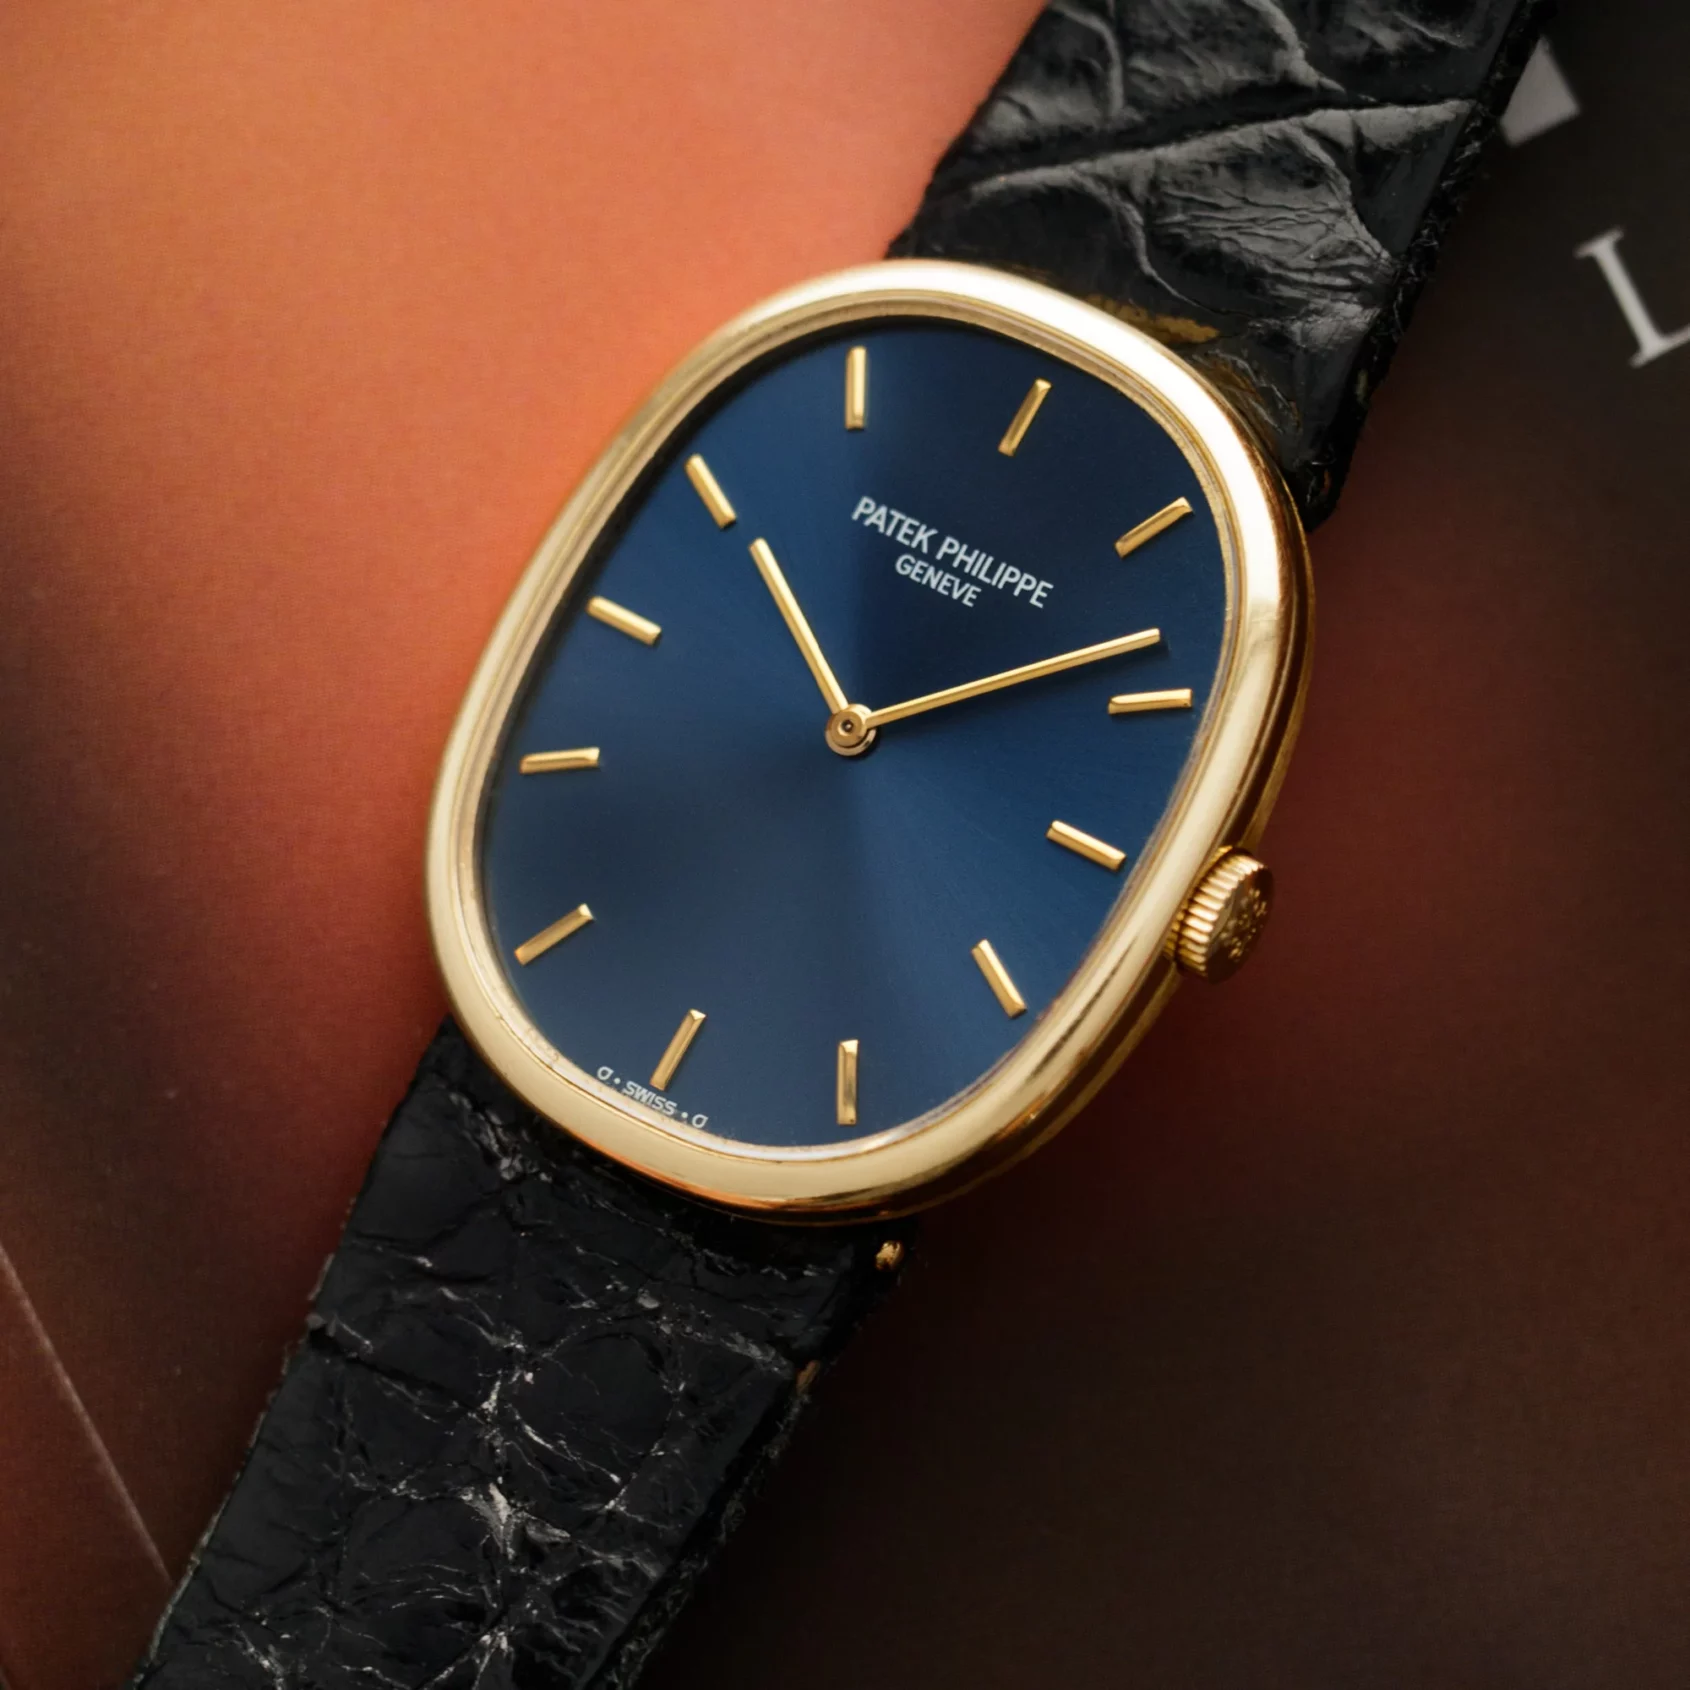 Gold rush: Three discontinued gold watches you can have for a bargain